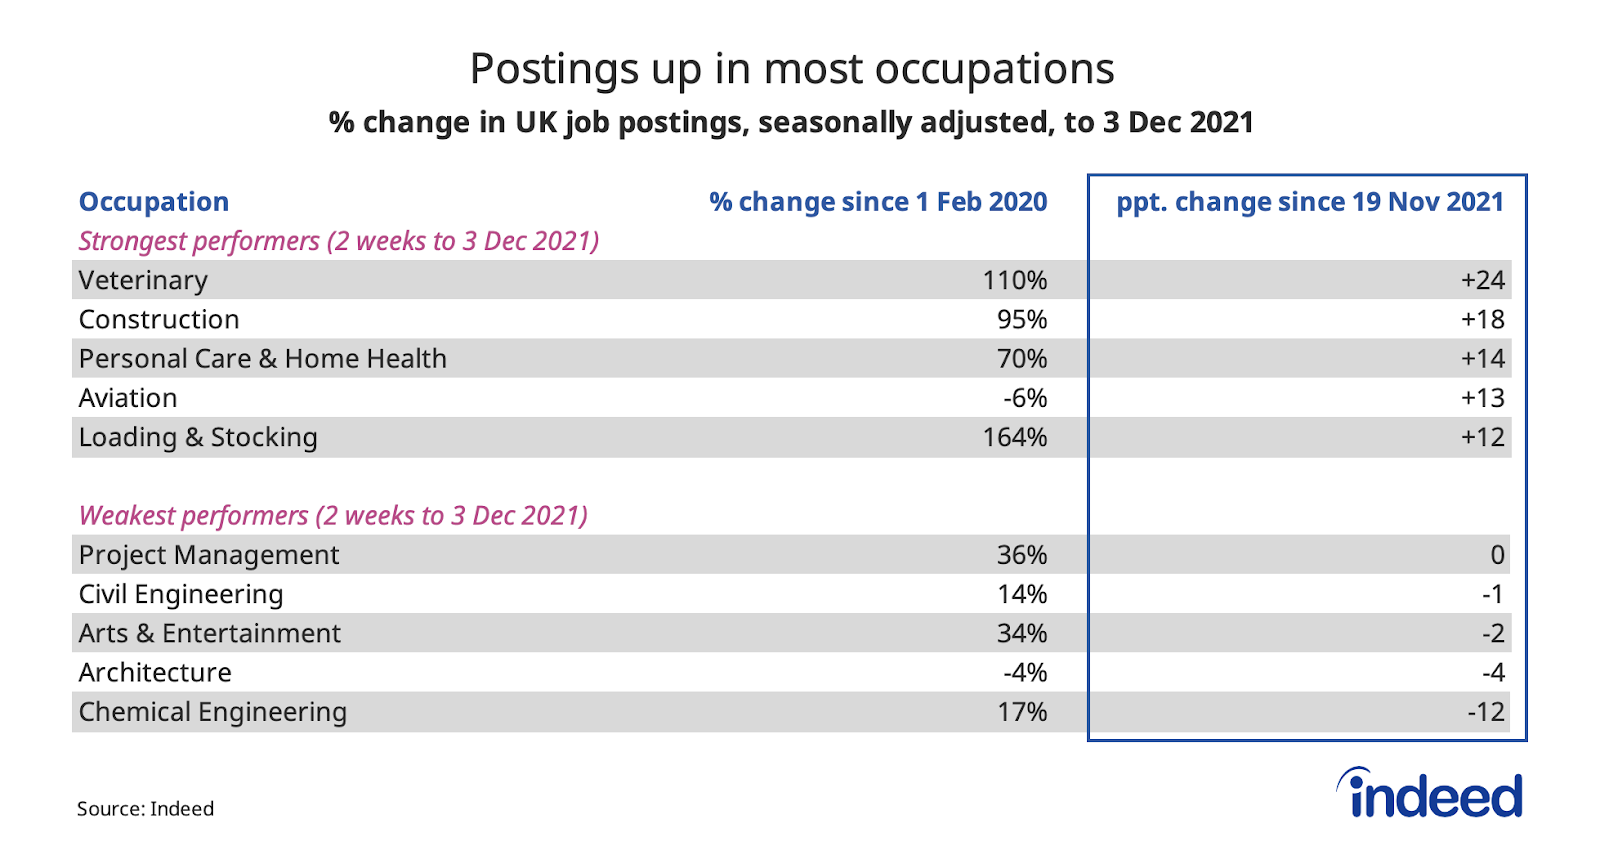 Table titled “Postings up in most occupations.”